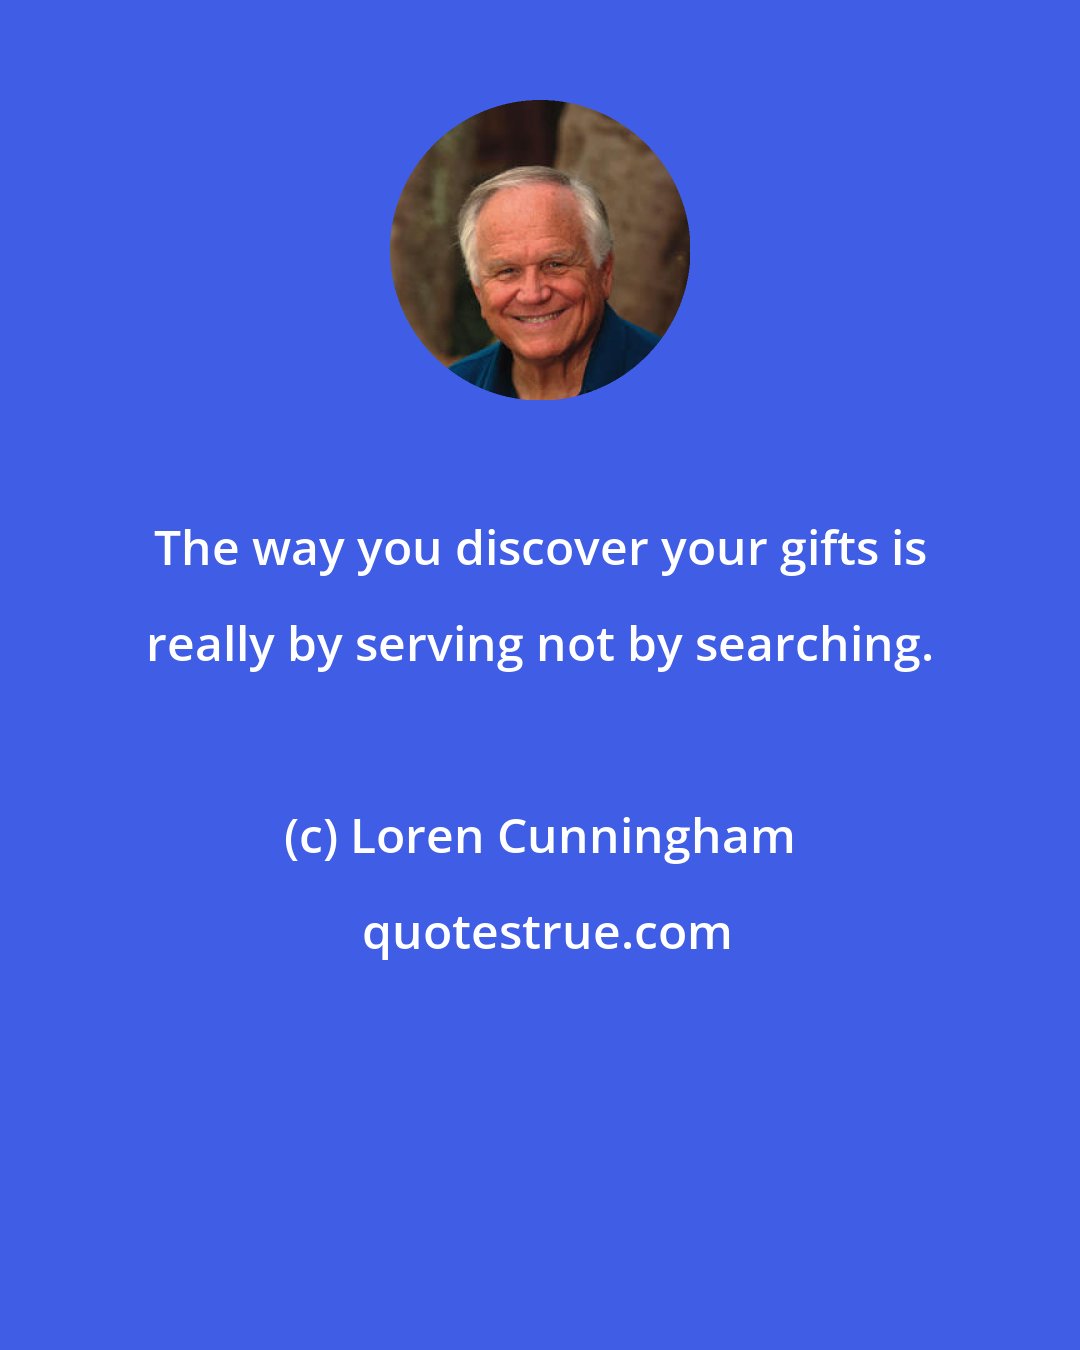 Loren Cunningham: The way you discover your gifts is really by serving not by searching.